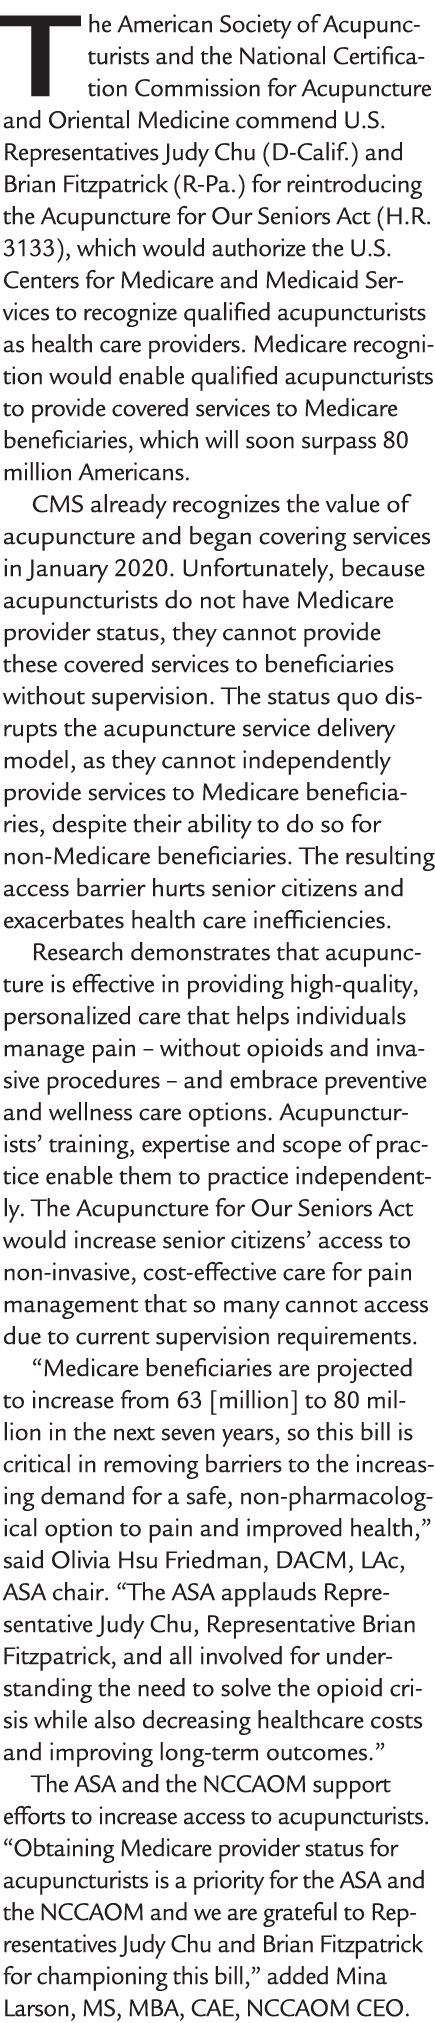 The American Society of Acupuncturists and the National Certification Commission for Acupuncture and Oriental Medicin...